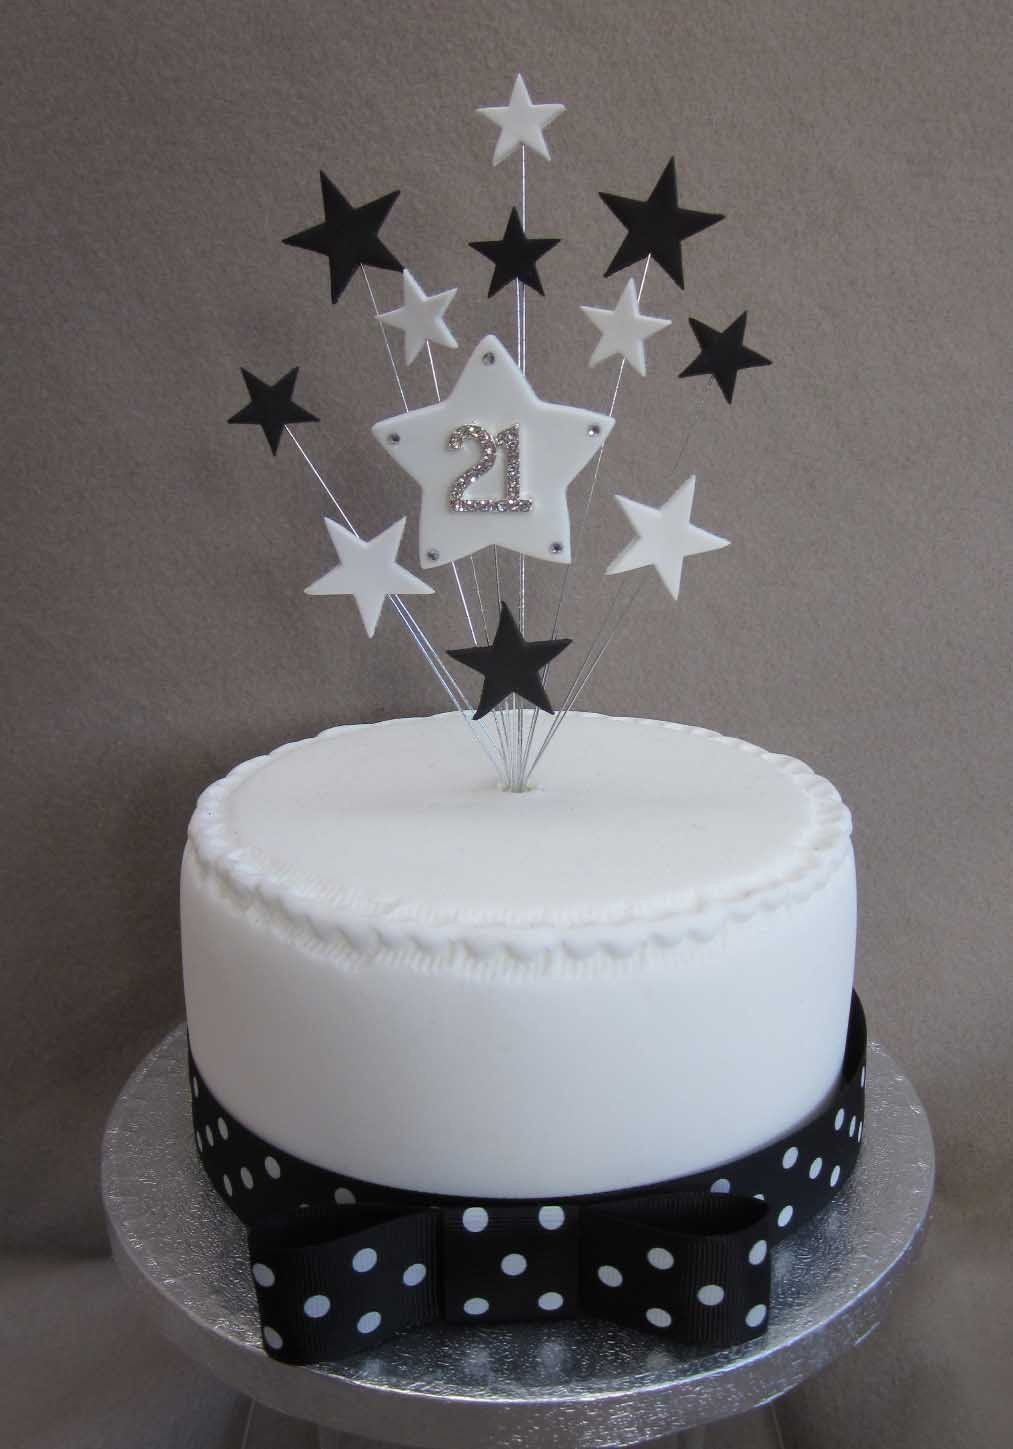 21St Birthday Cake Toppers
 21st Birthday Cake Topper Black And White Stars Suitable